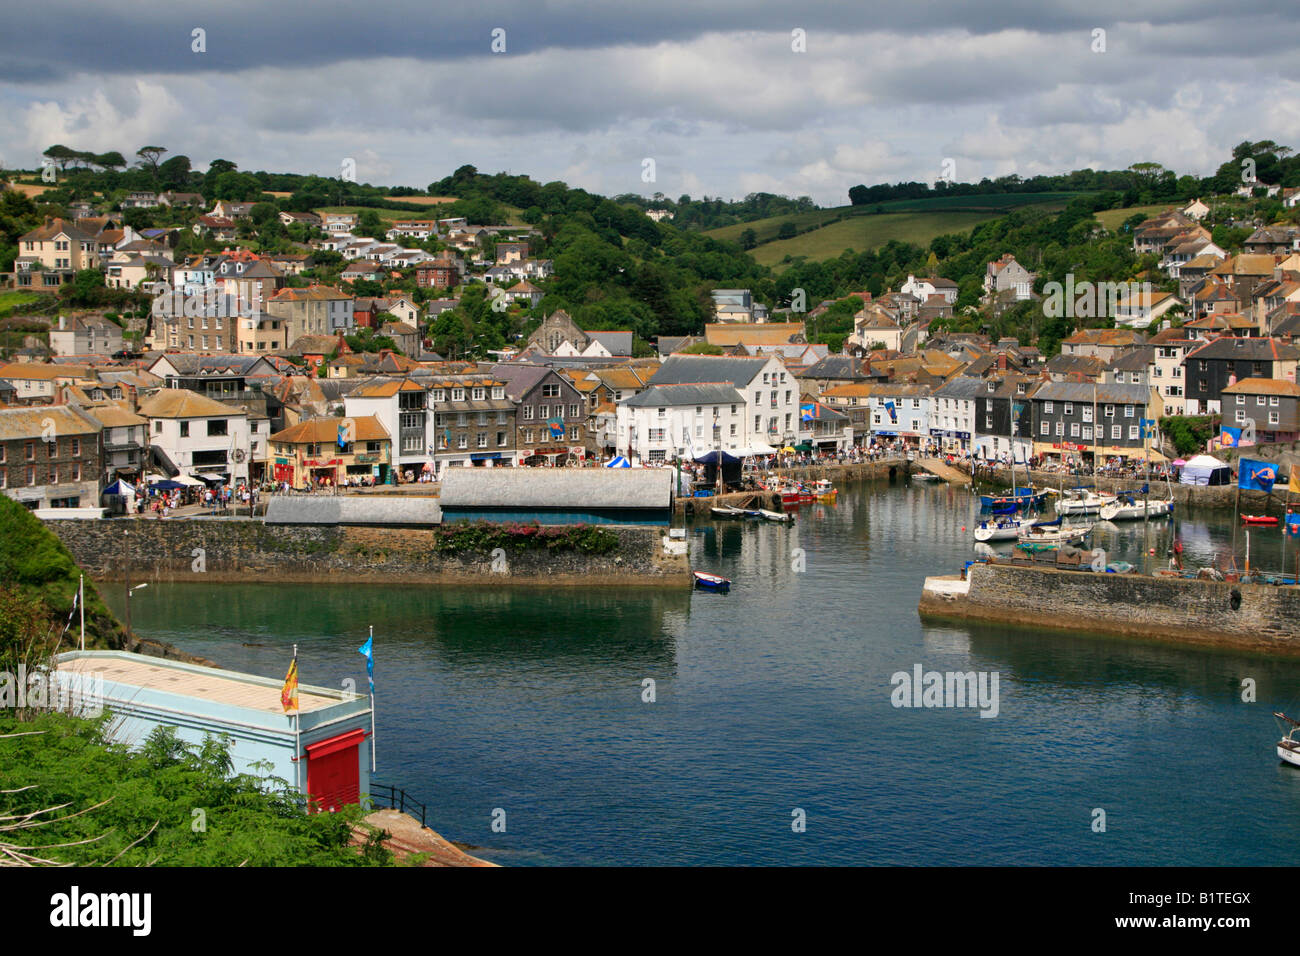 Mevagissey (Cornish: Lannvorek) is a village and fishing port situated six miles south of St Austell in Cornwall, England, UK Stock Photo